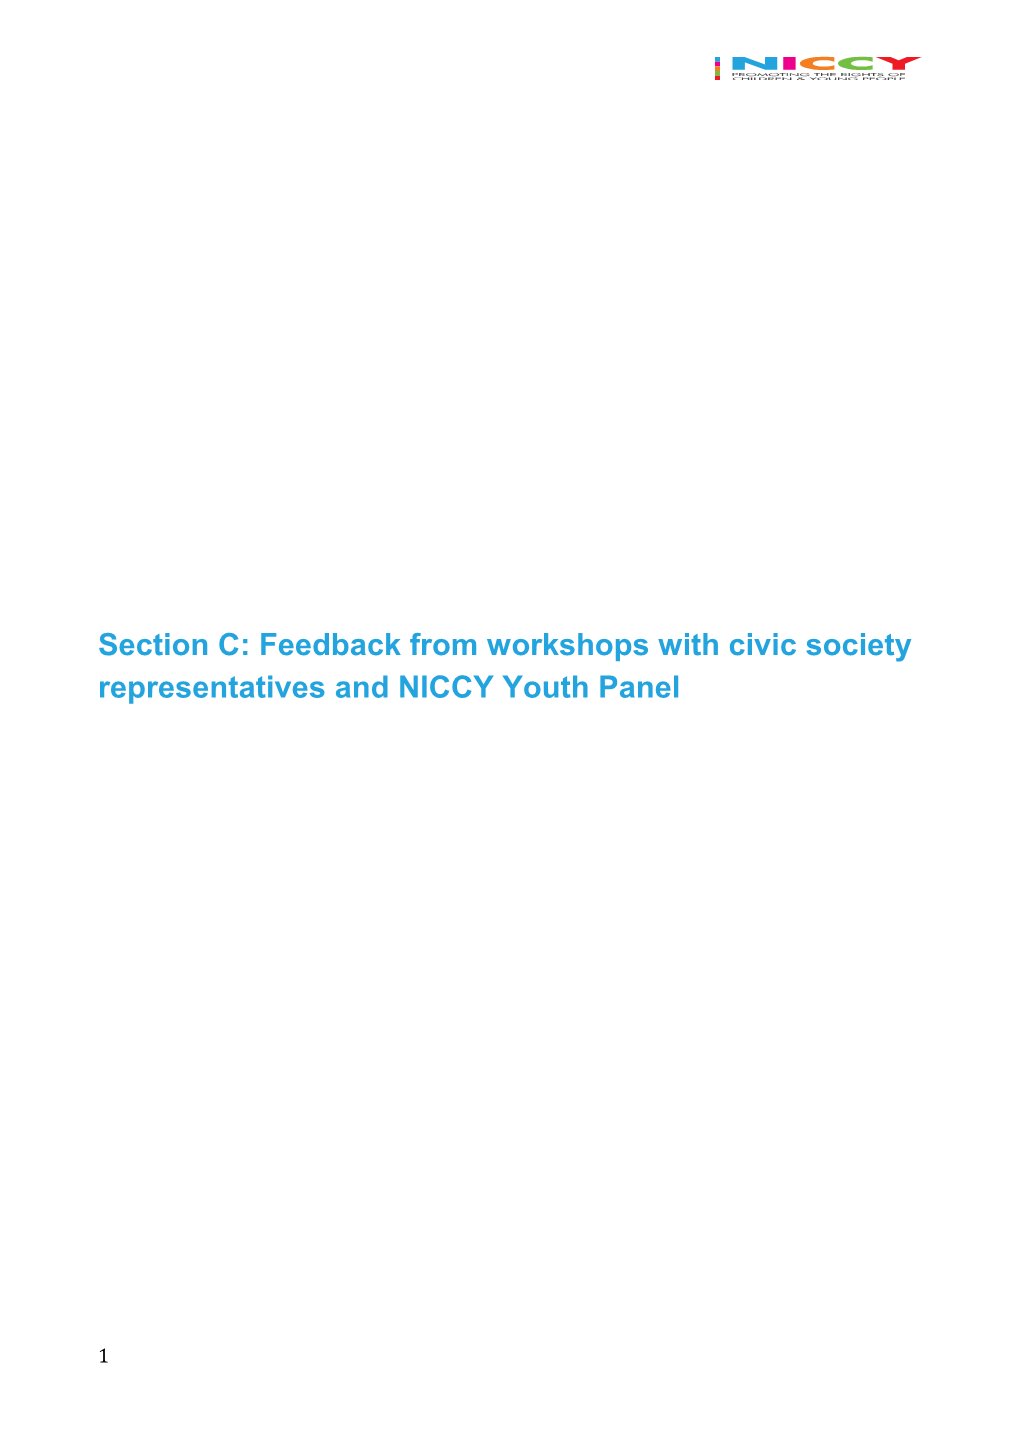 Section C: Feedback from Workshops with Civic Society Representatives and NICCY Youth Panel